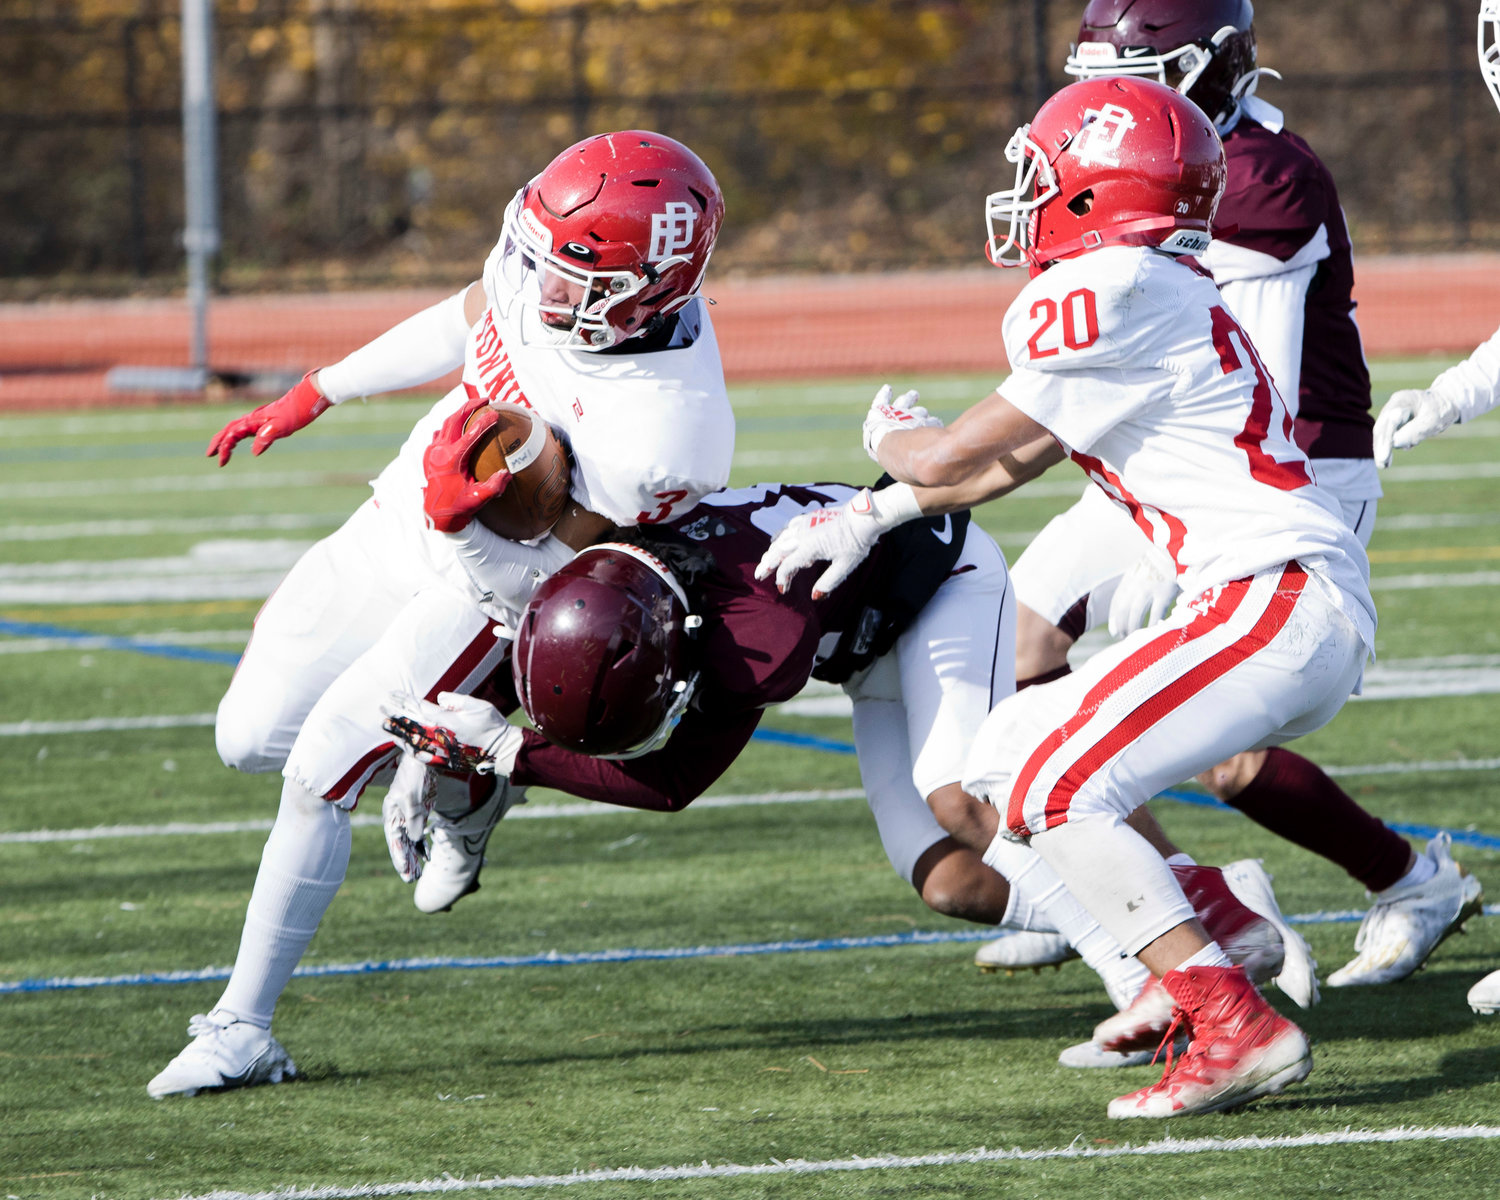 East Providence’s Joel Arias is late to block as Yusef Abdullah is tackled by a LaSalle defender.